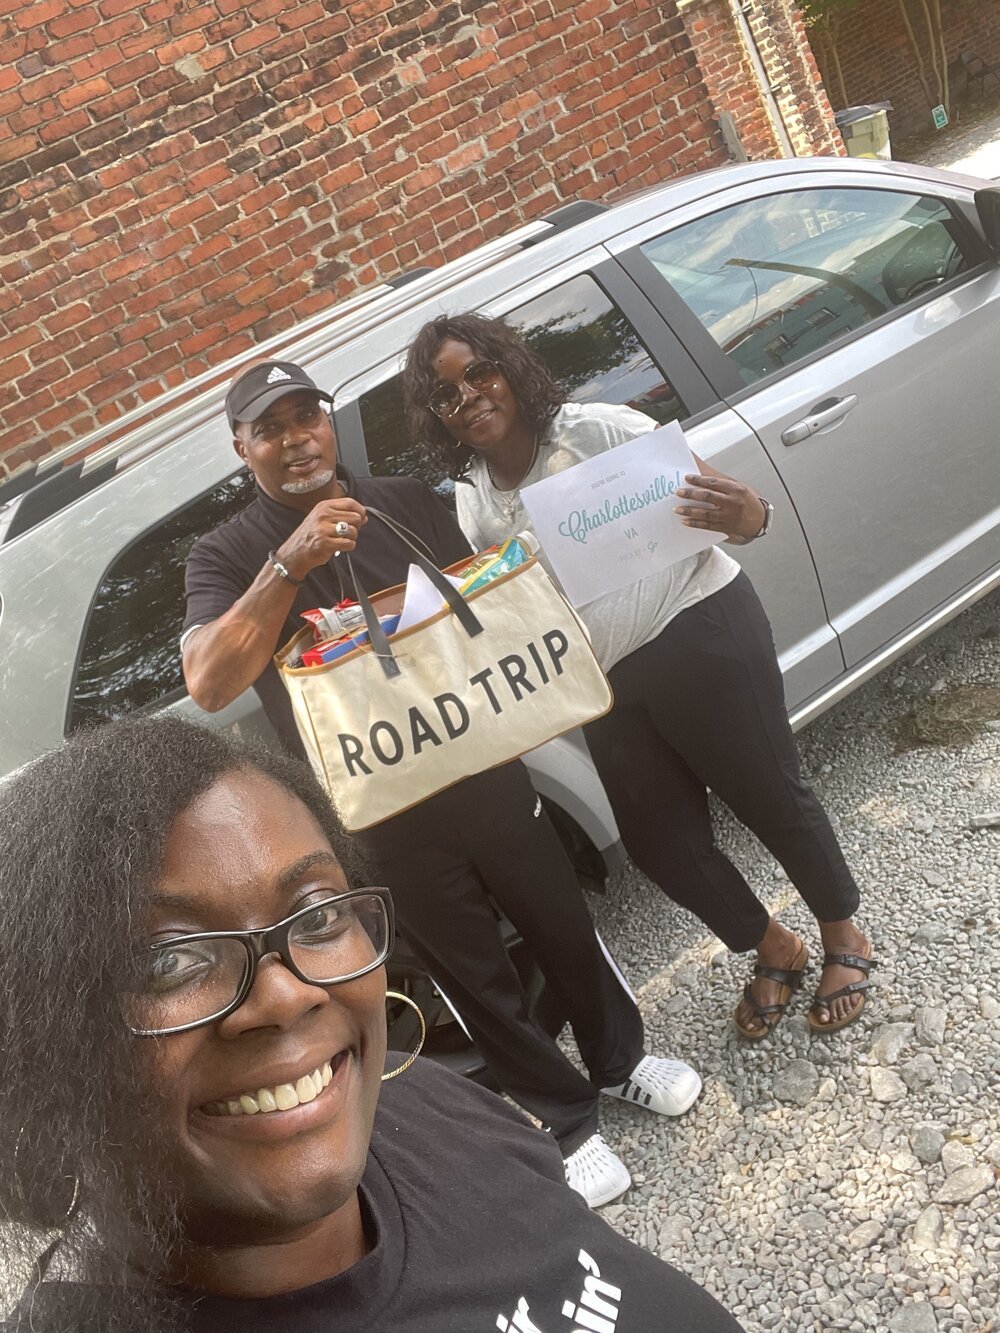 A family poses for a selfie in front of a car. One traveler is holding a destination reveal sign that says, "Charlottesville, VA" and the other is holding a tote bag with the words "Road Trip" printed on the front.